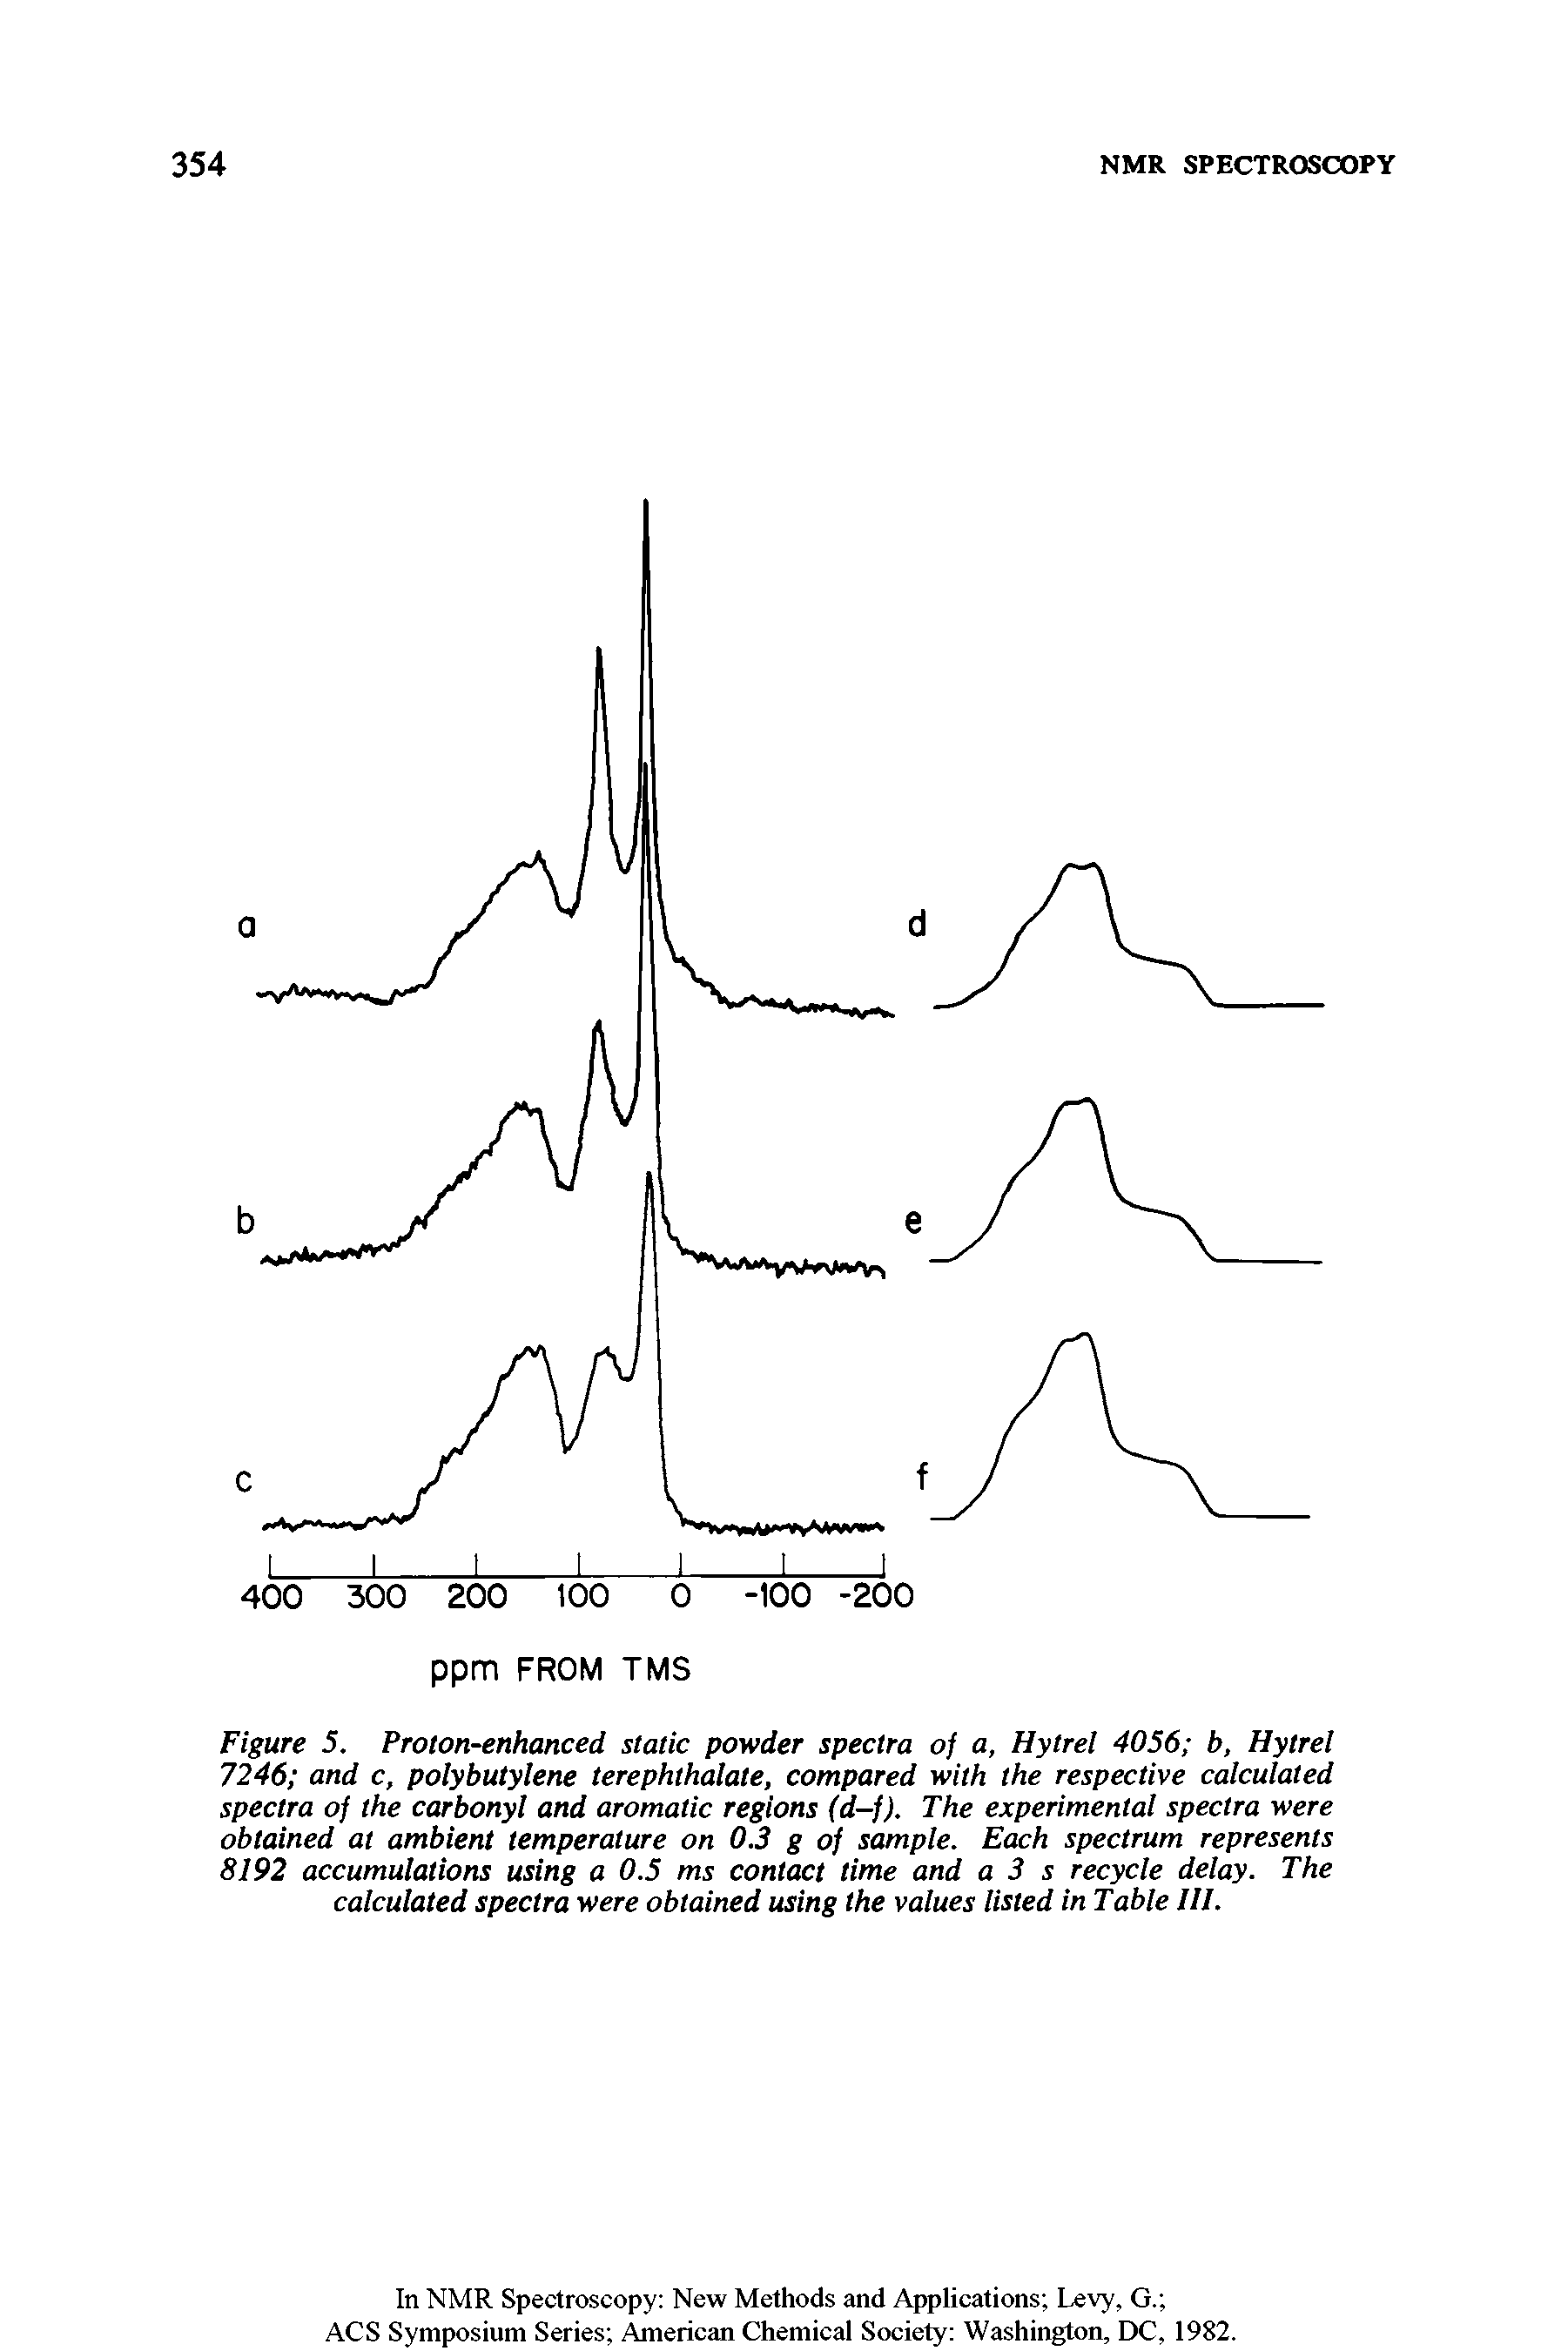 Figure 5. Proton-enhanced static powder spectra of a, Hytrel 4056 b, Hytrel 7246 and c, polybutylene terephthalate, compared with the respective calculated spectra of the carbonyl and aromatic regions (d-f). The experimental spectra were obtained at ambient temperature on 0.3 g of sample. Each spectrum represents 8192 accumulations using a 0.5 ms contact time and a 3 s recycle delay. The calculated spectra were obtained using the values listed in Table III.